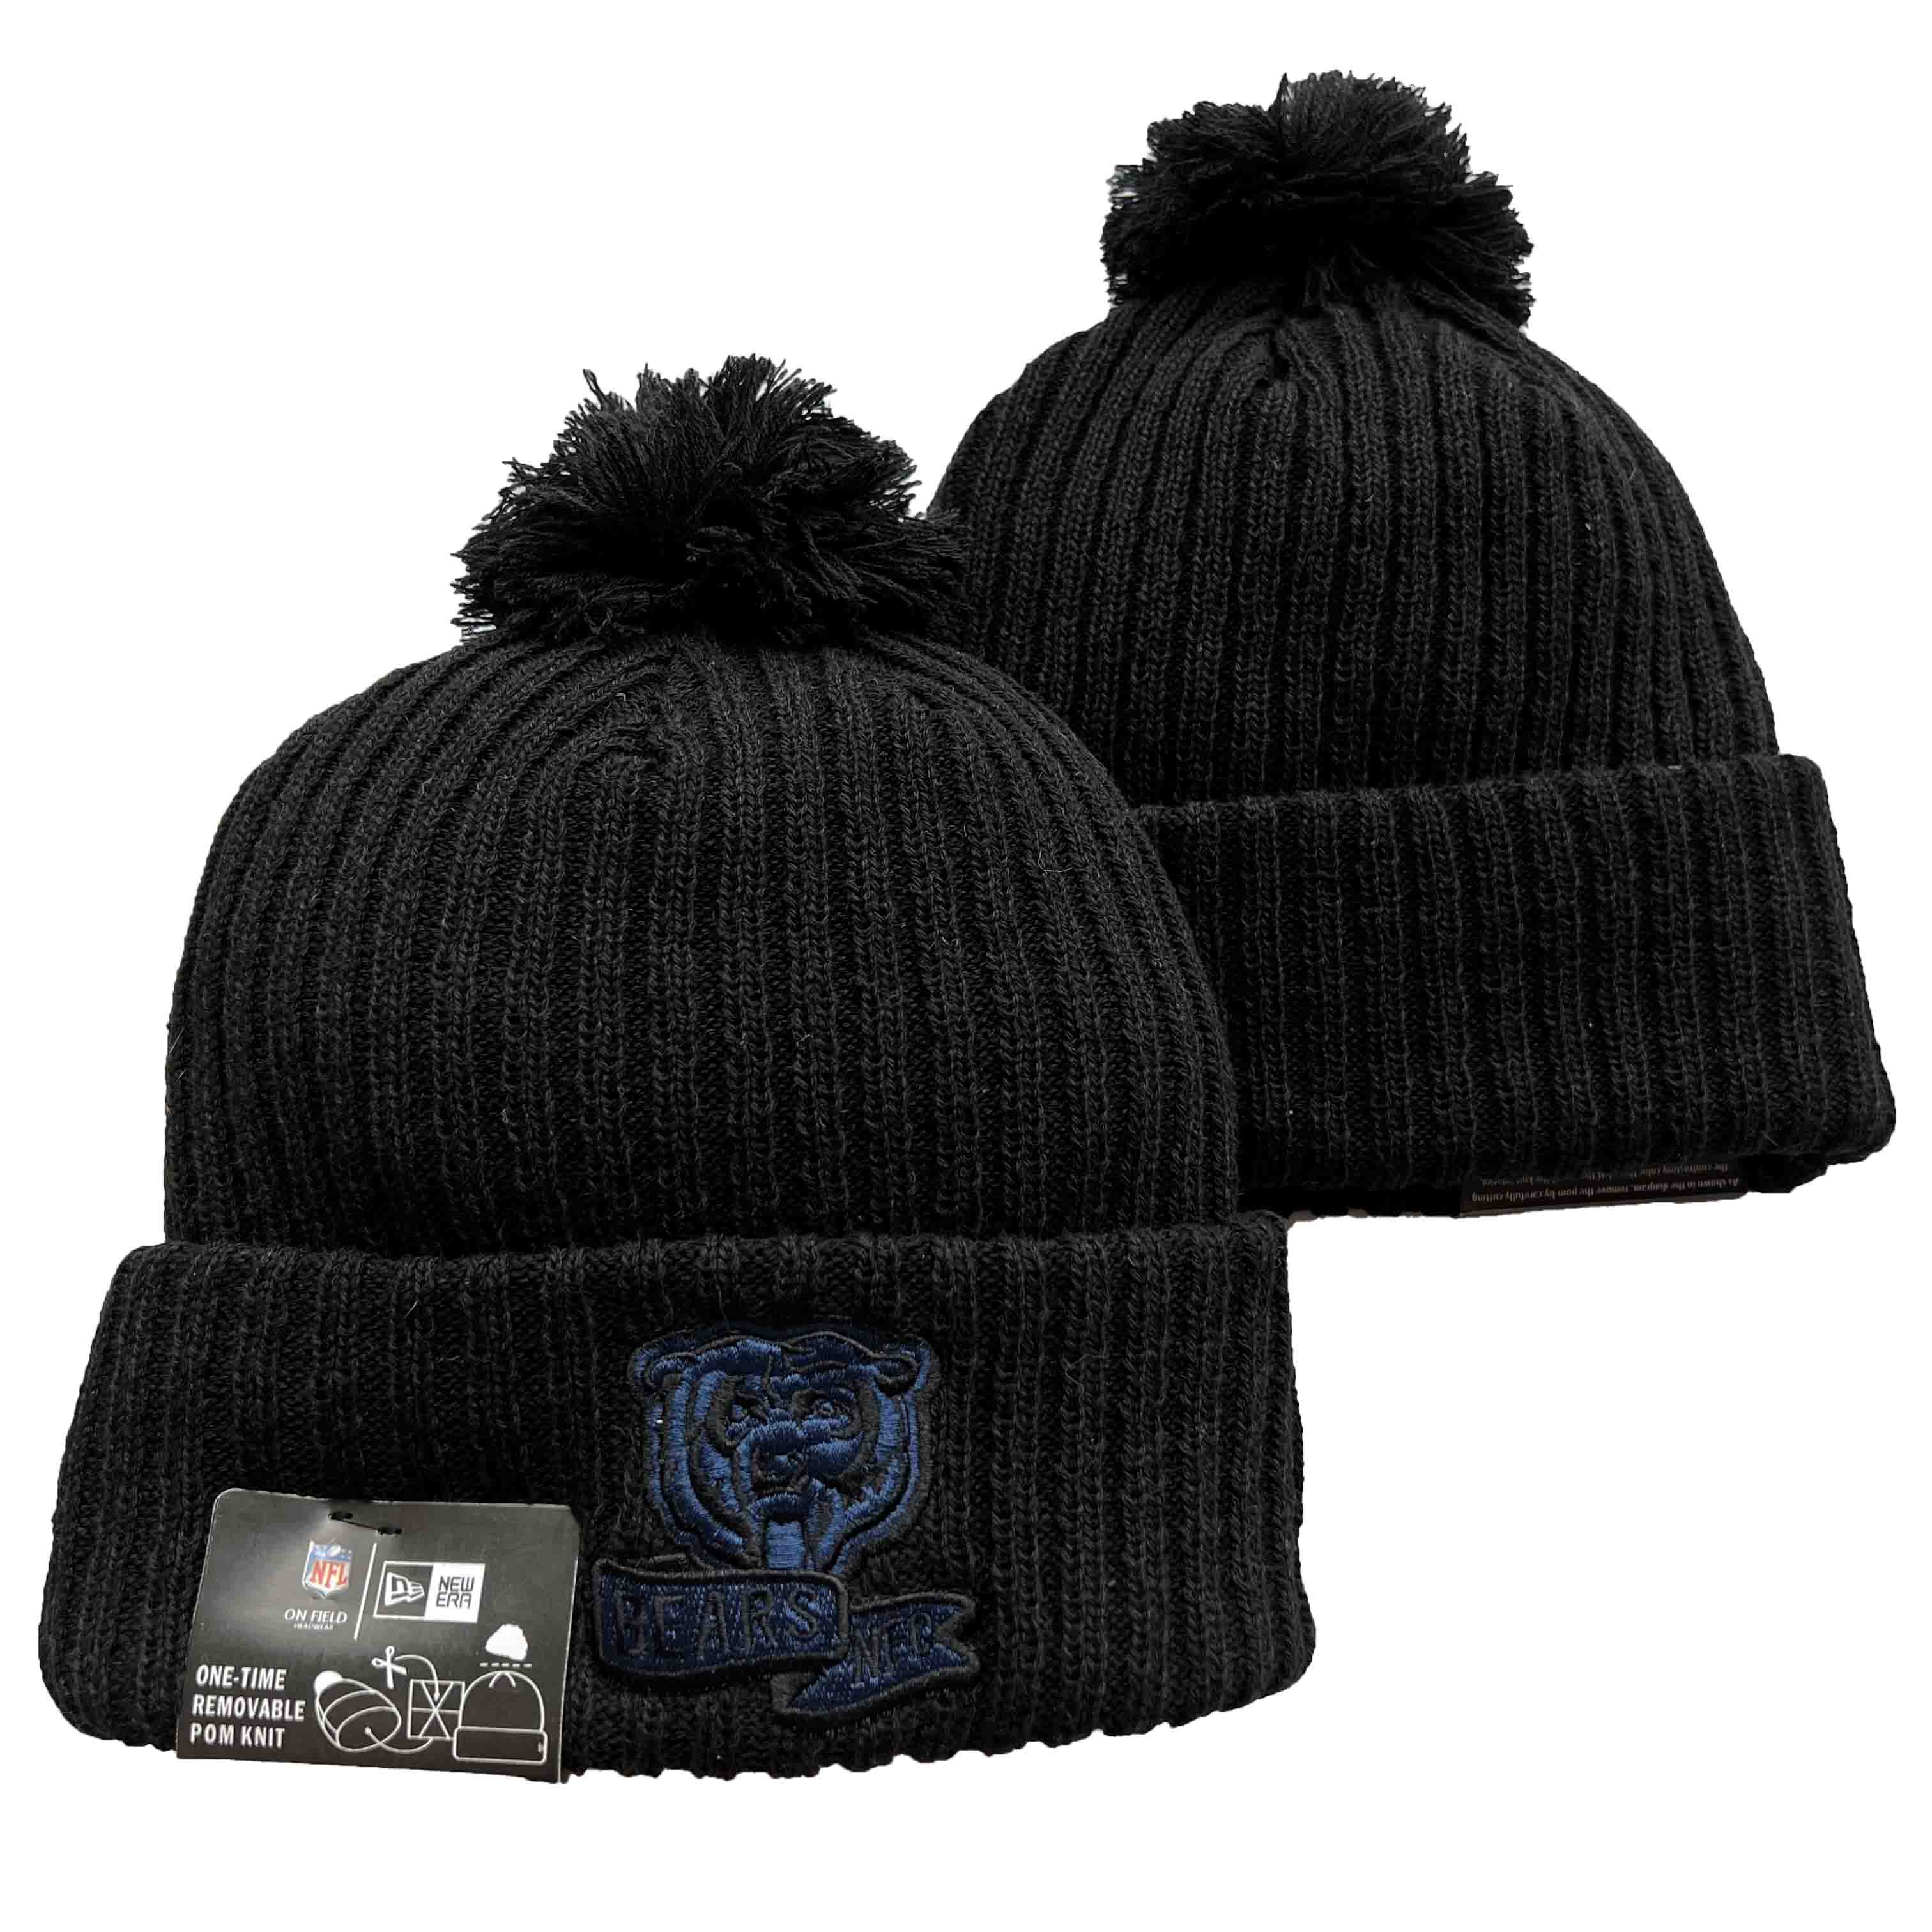 NFL Chicago Bears Beanies Knit Hats-YD889